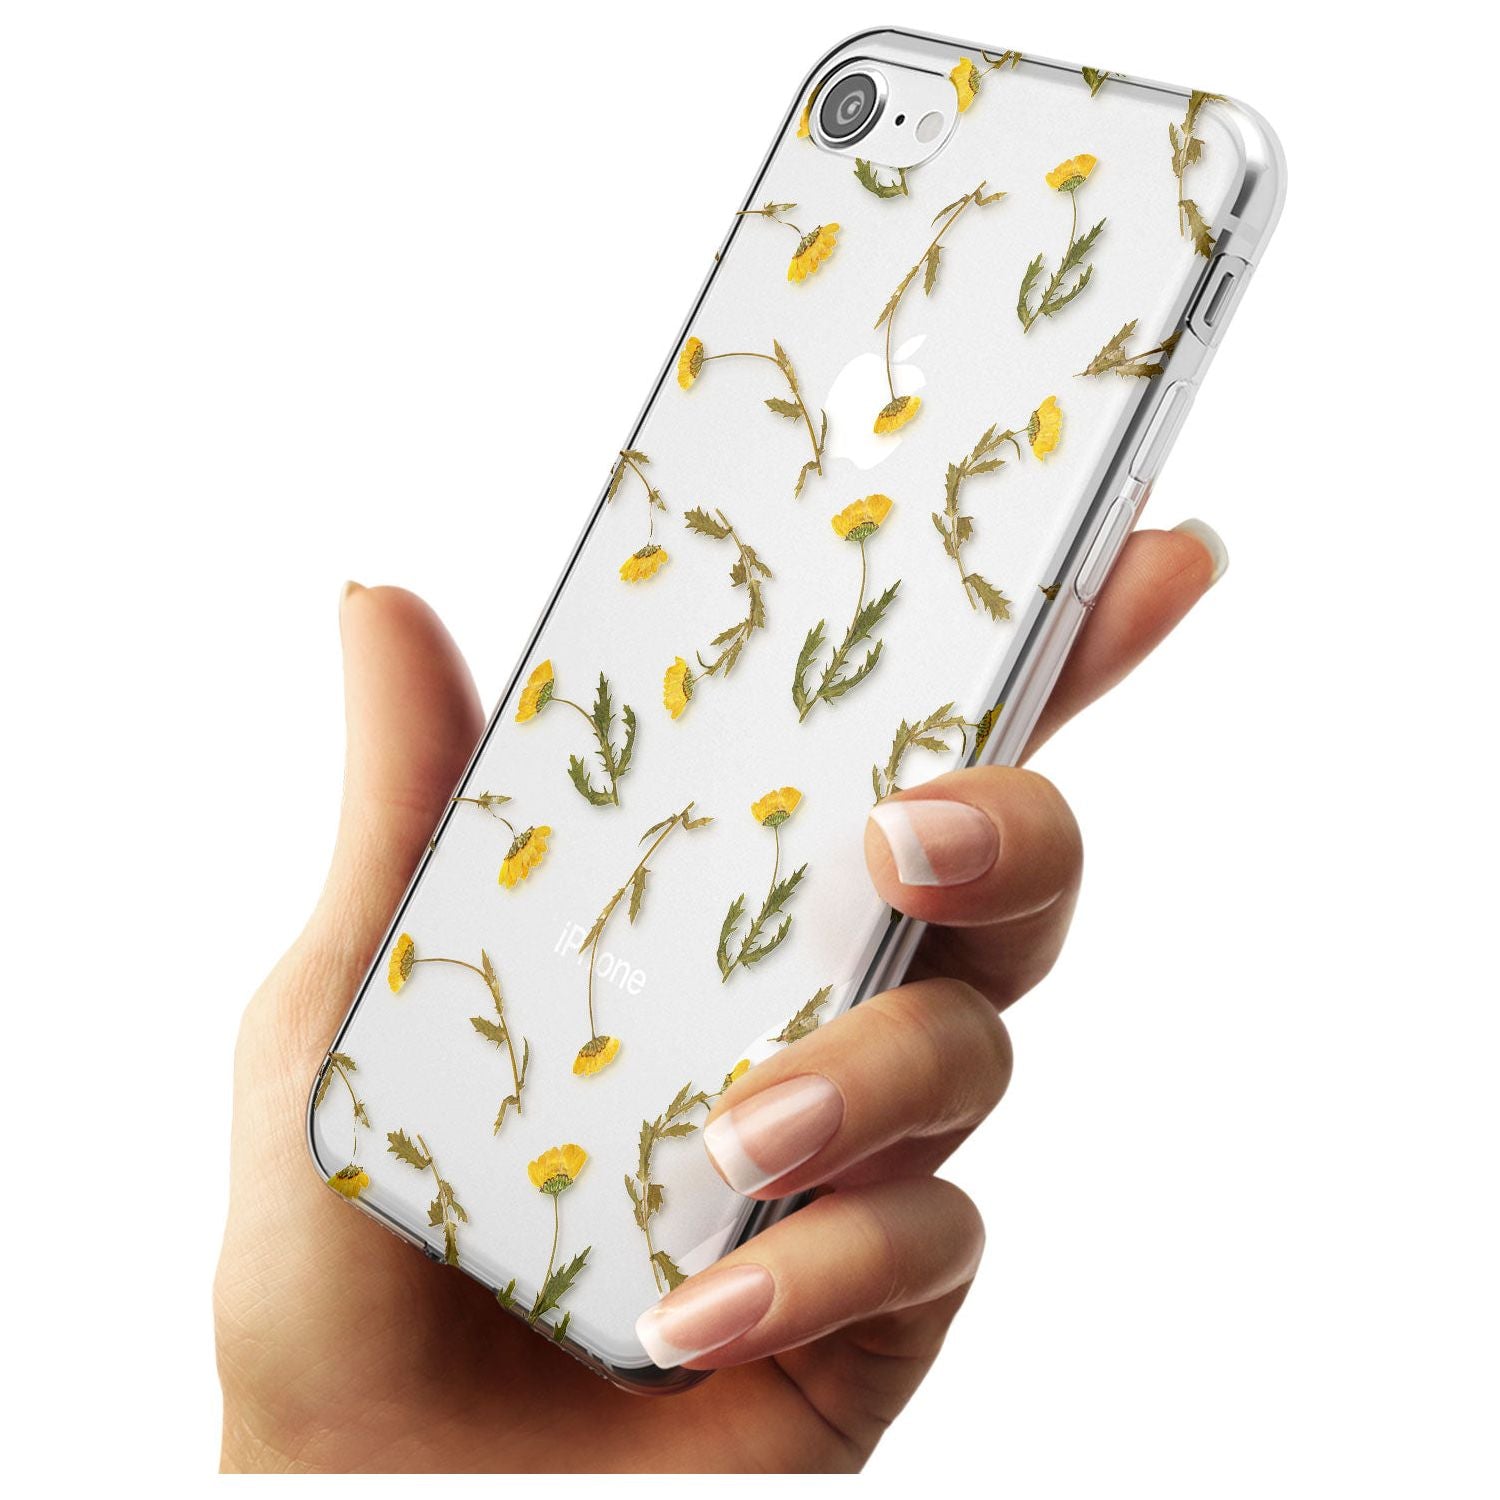 Long Stemmed Wildflowers - Dried Flower-Inspired Slim TPU Phone Case for iPhone SE 8 7 Plus